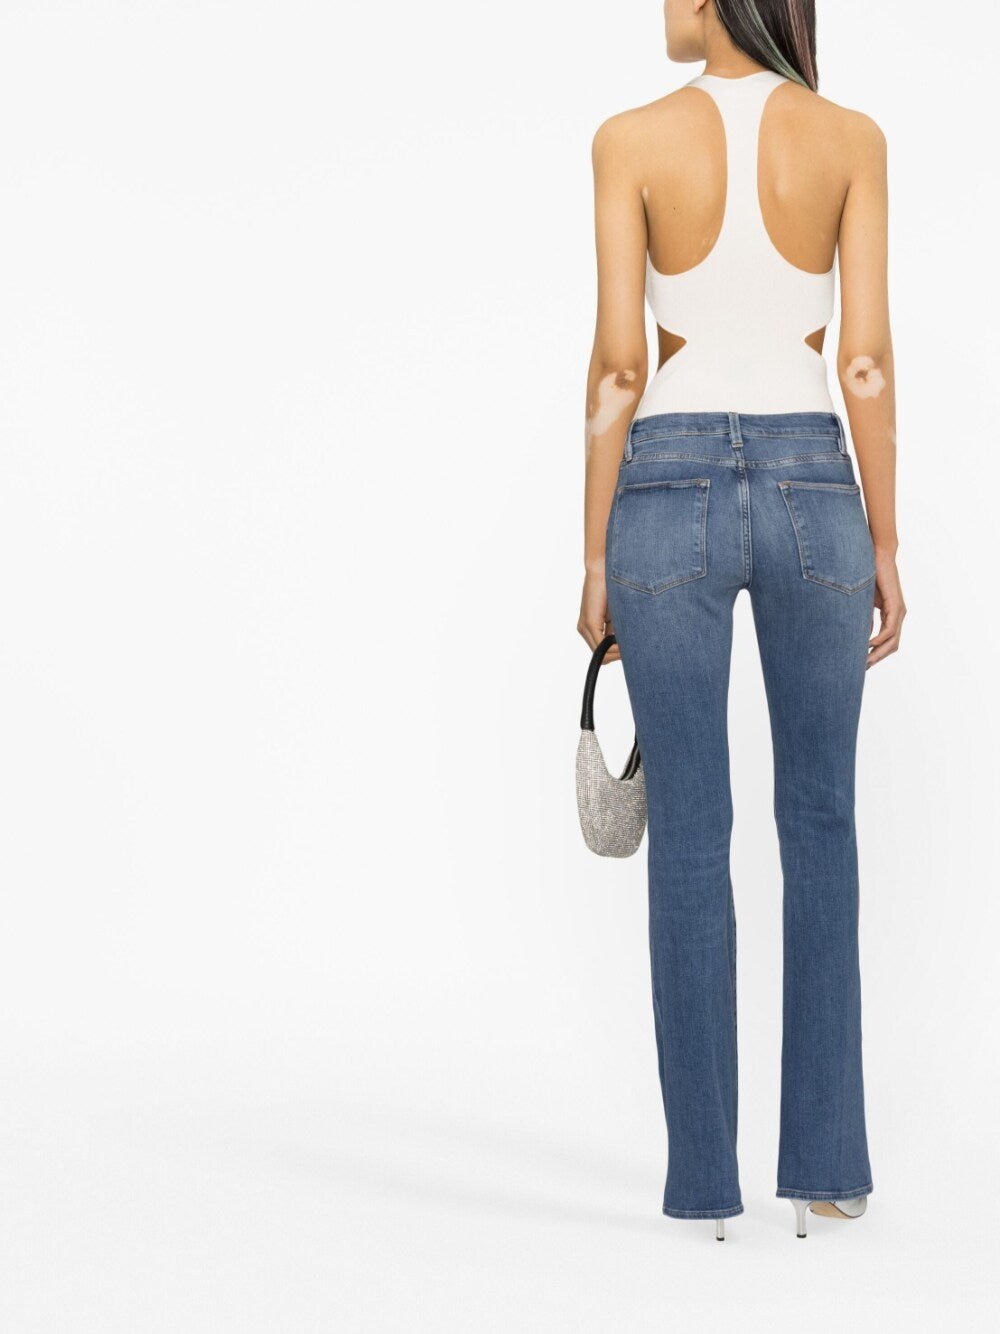 FrameLe High Flare jeans at Fashion Clinic